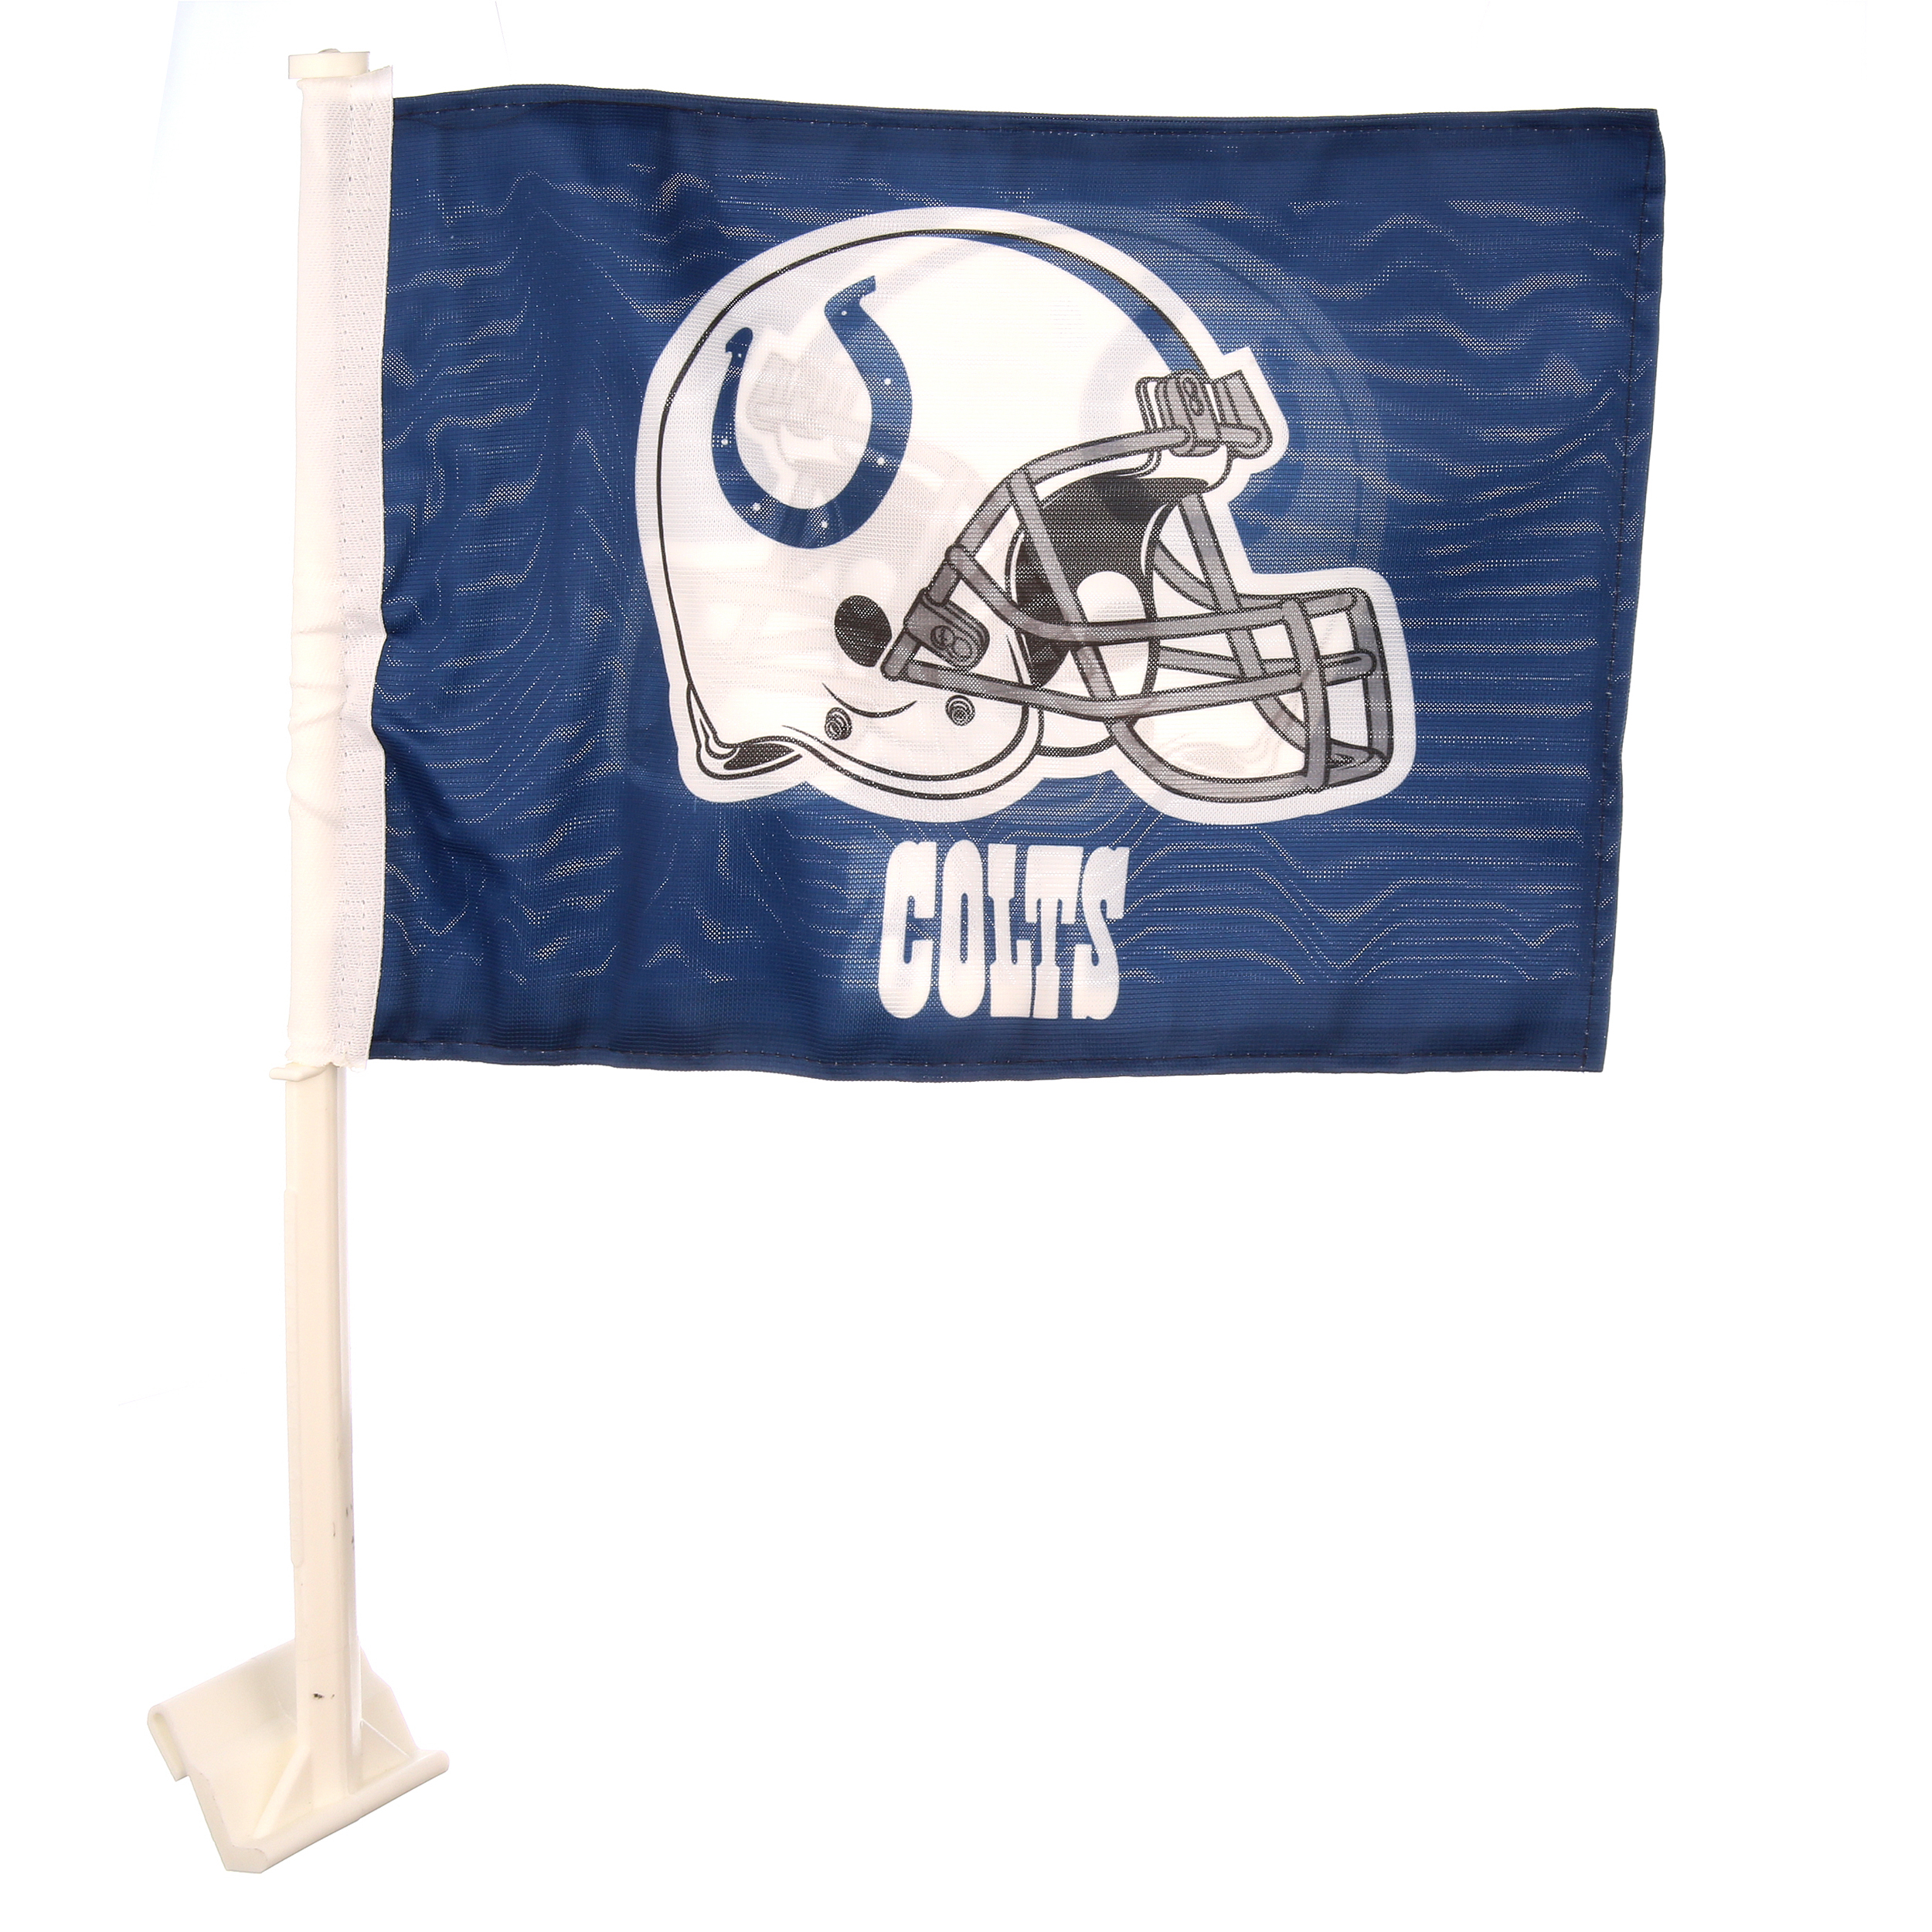 Indianapolis NFL Colts 11X14 Window Mount 2-Sided Car Flag - image 3 of 5